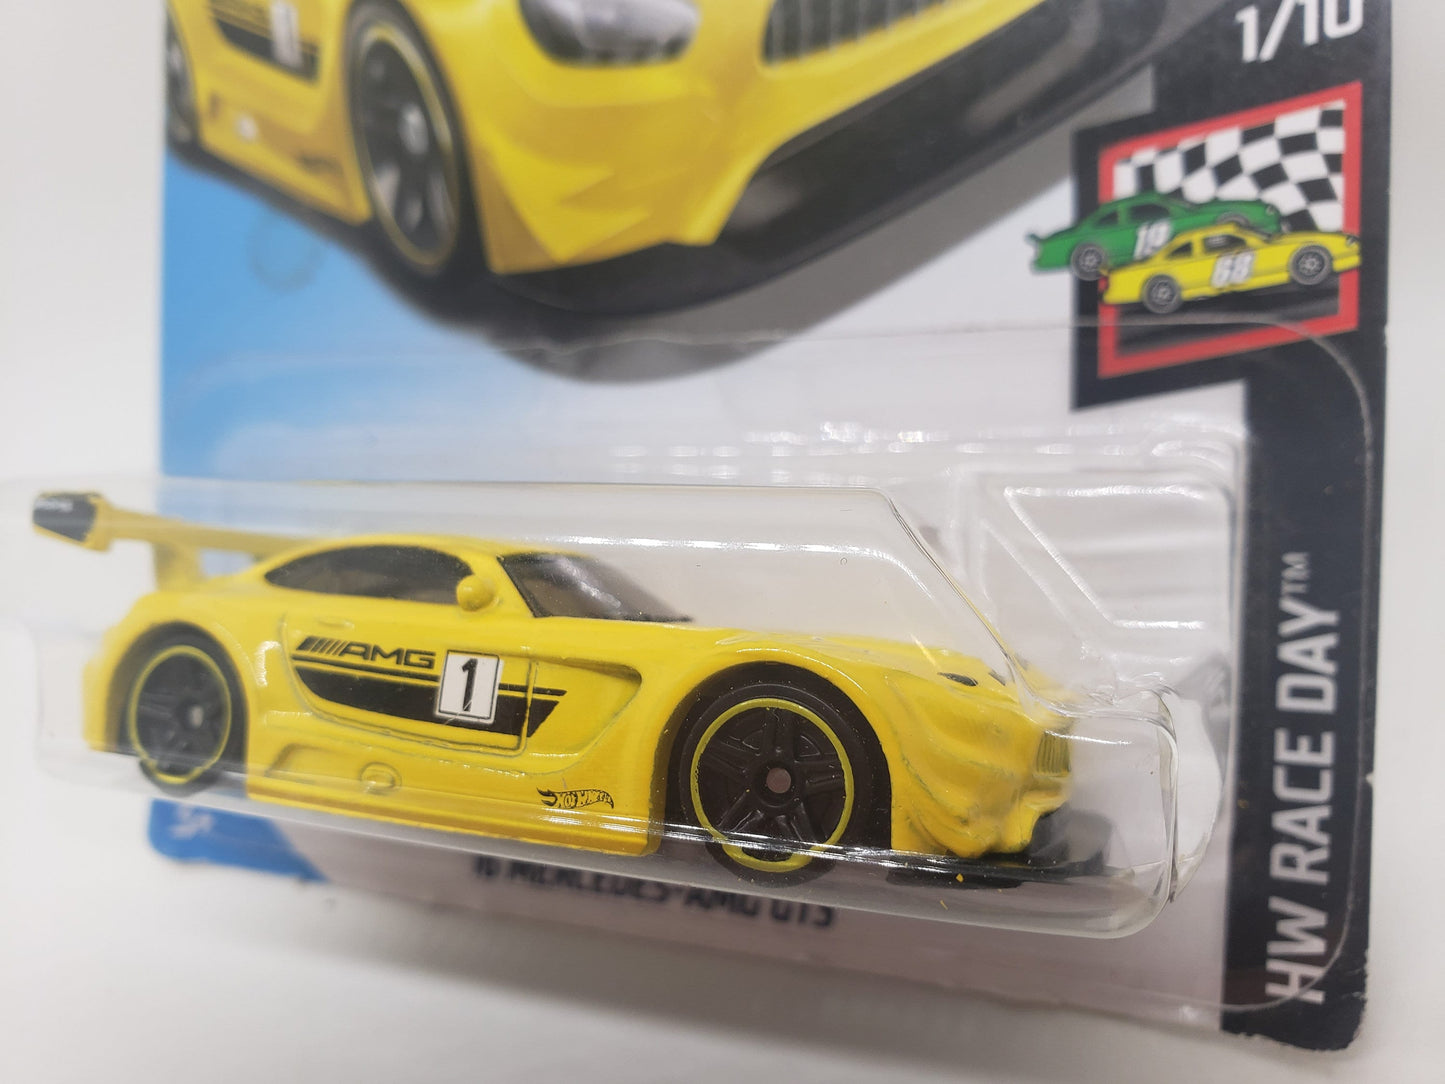 Hot Wheels Mercedes-AMG GT3 Yellow HW Race Day Perfect Birthday Gift Miniature Collectable Model Toy Car